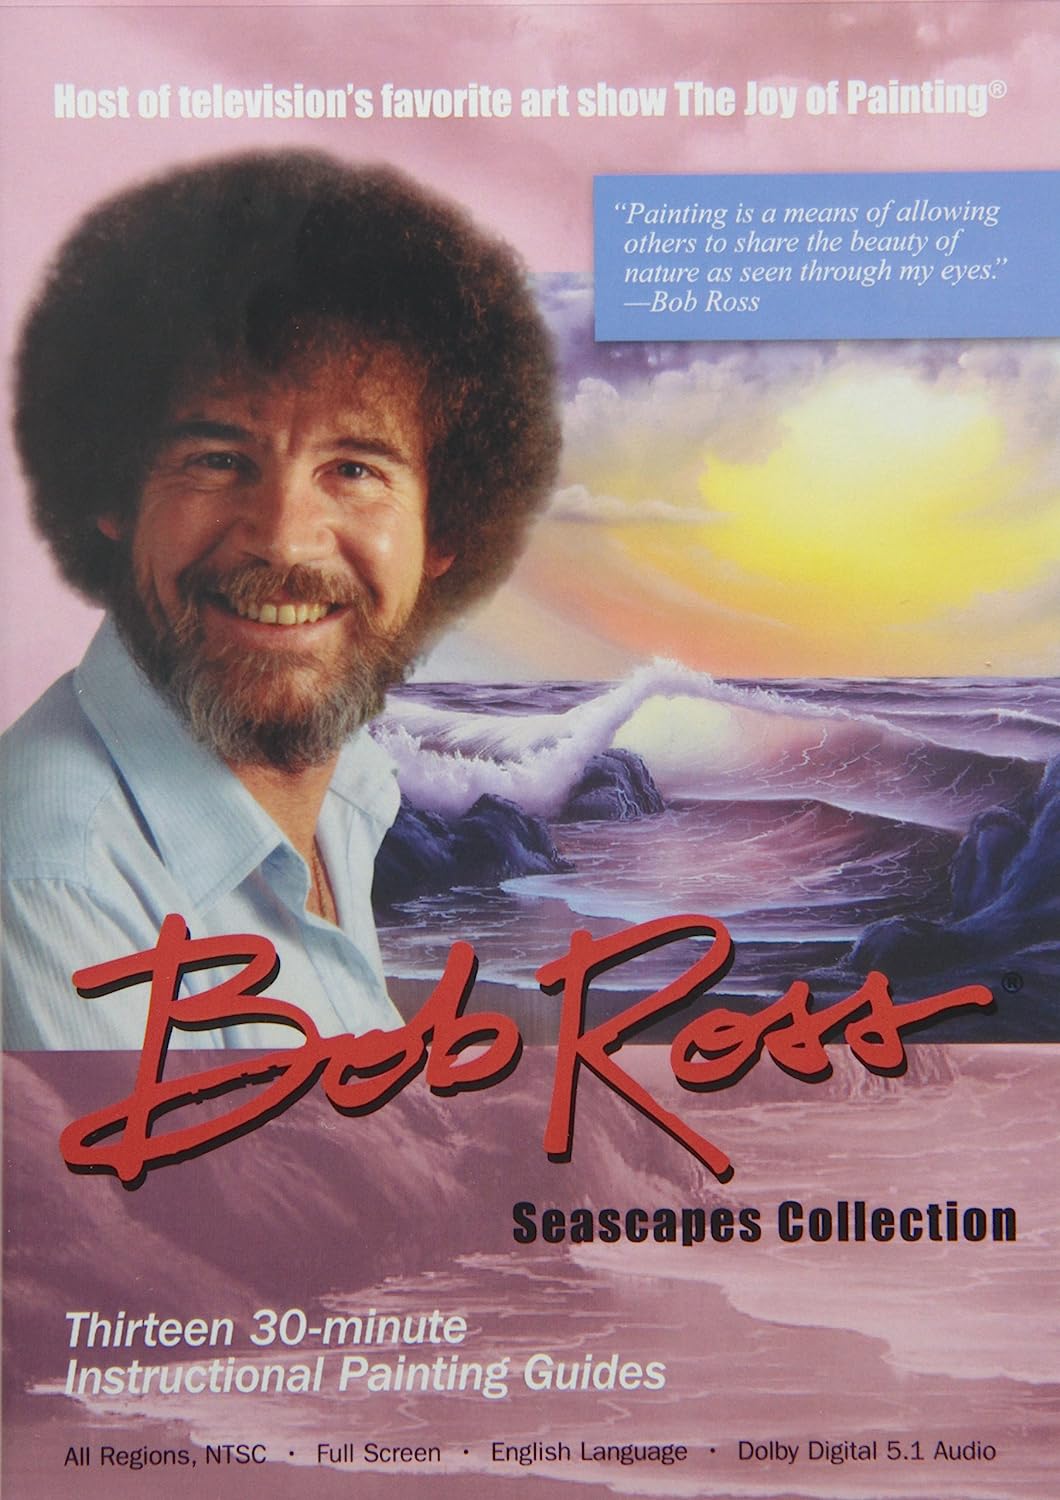 Bob Ross Joy of Painting: Seascape Collection